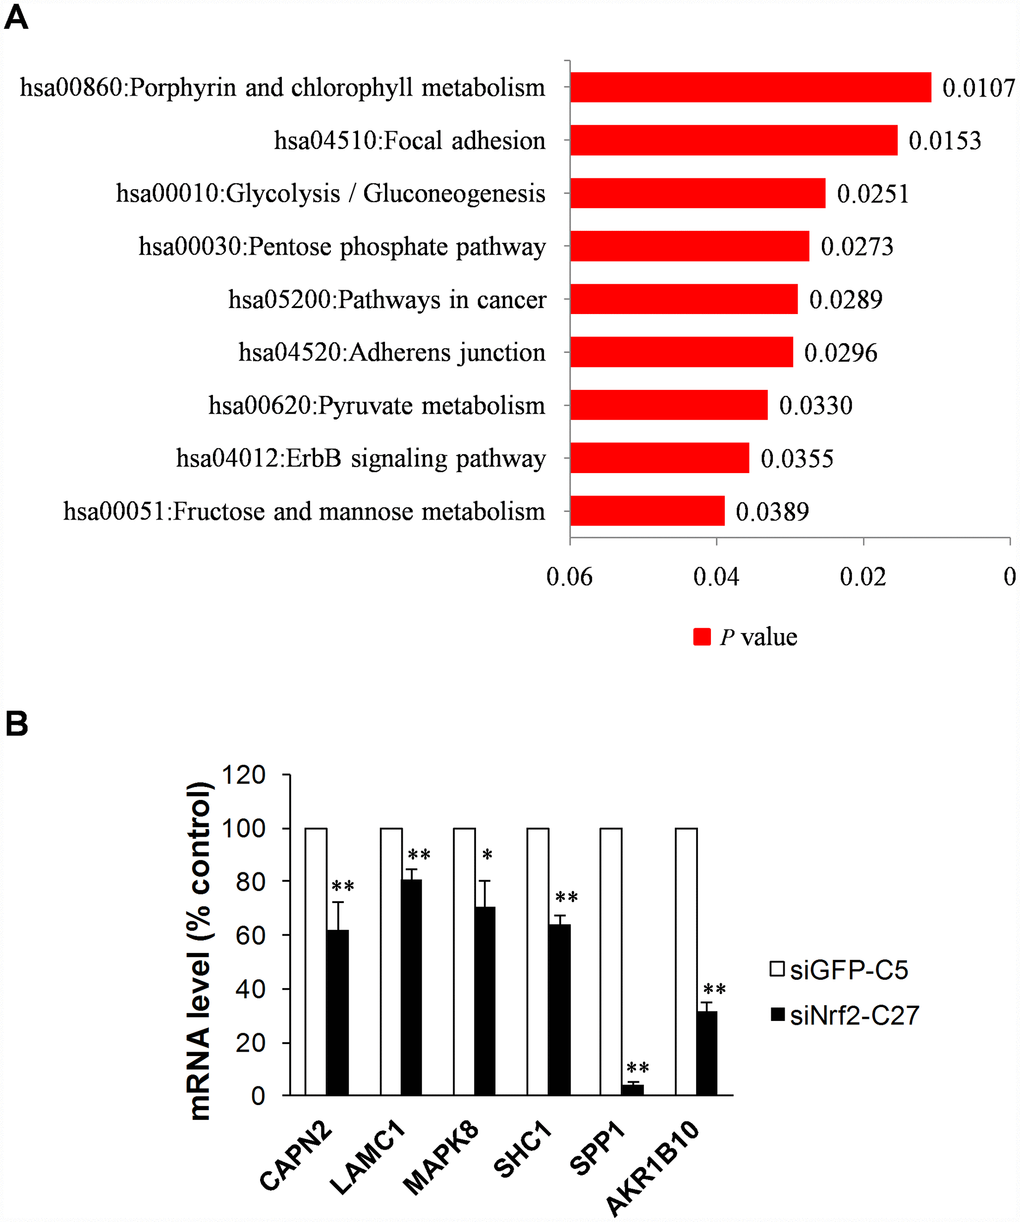 Functional annotation and validation of novel NRF2-regulated genes using qRT-PCR. (A) Bar chart of KEGG pathways associated with the NRF2 TFBS (PB) NRF2-driven focal adhesion pathway genes downregulated in NRF2-knockdown A549 cells (18S rRNA served as an internal control; value for siGFP-C5 cells was set at 100%; *p